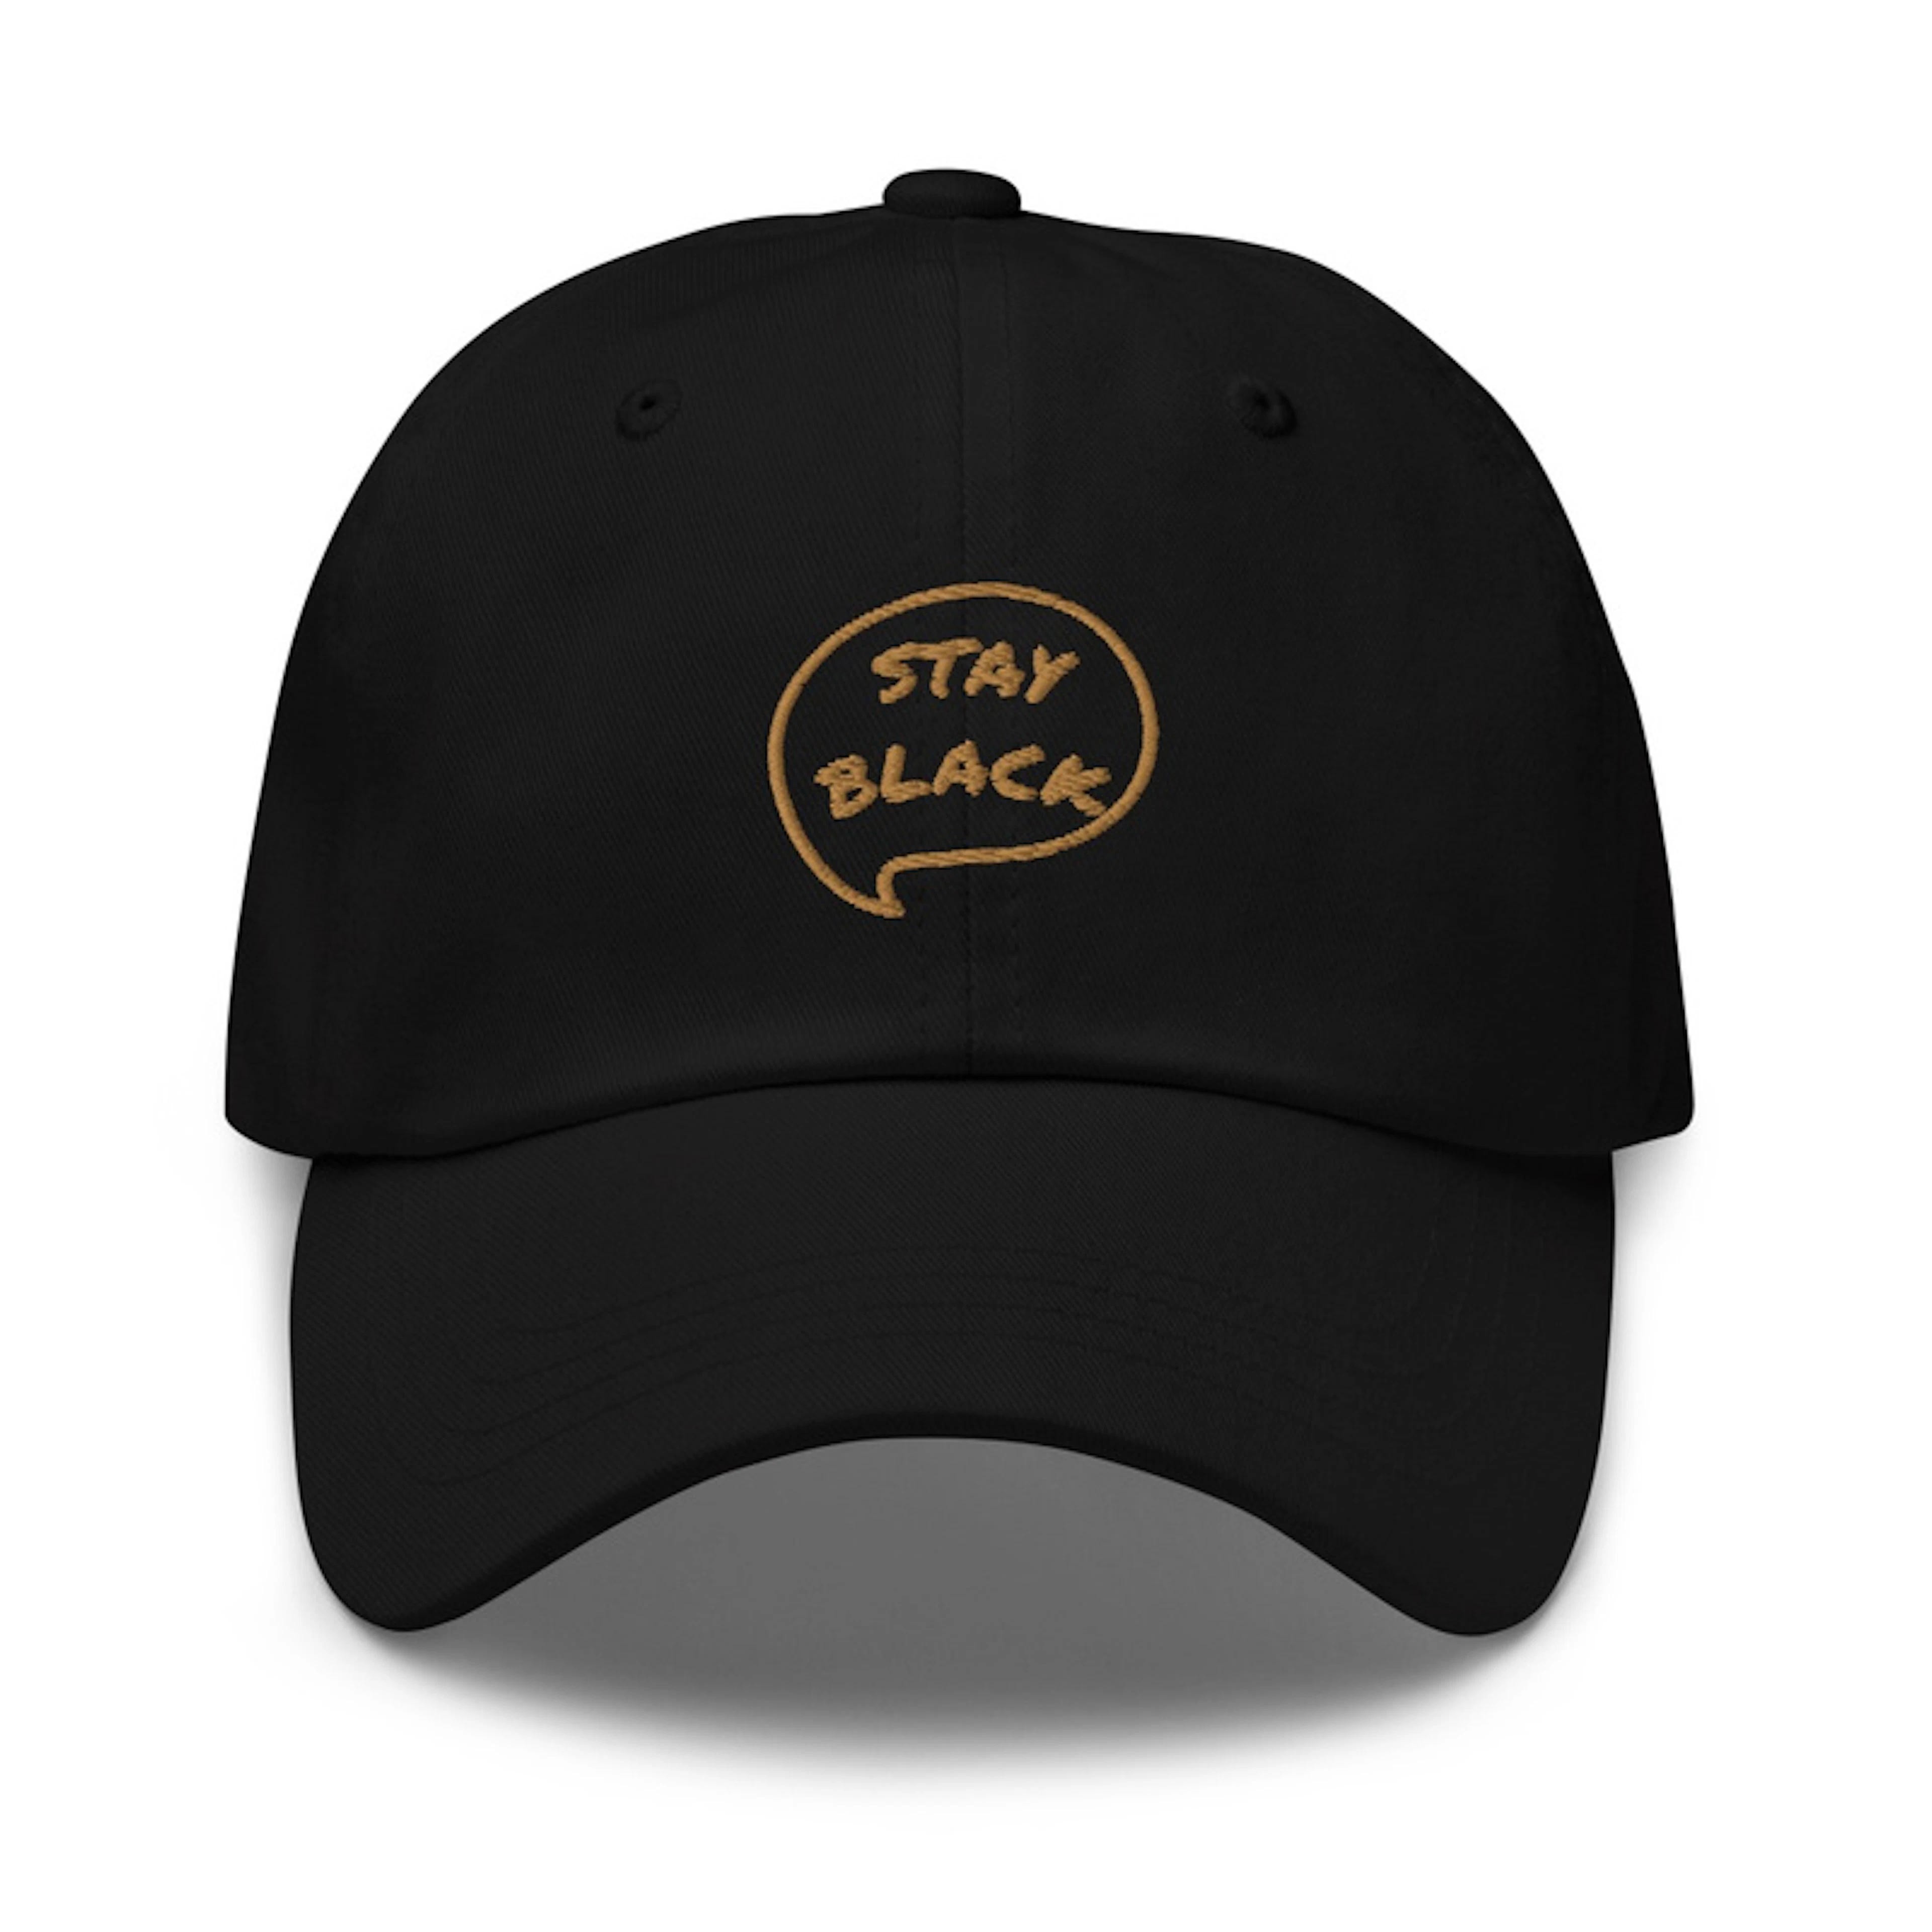 Stay Black Chat Bubble Dad Hat